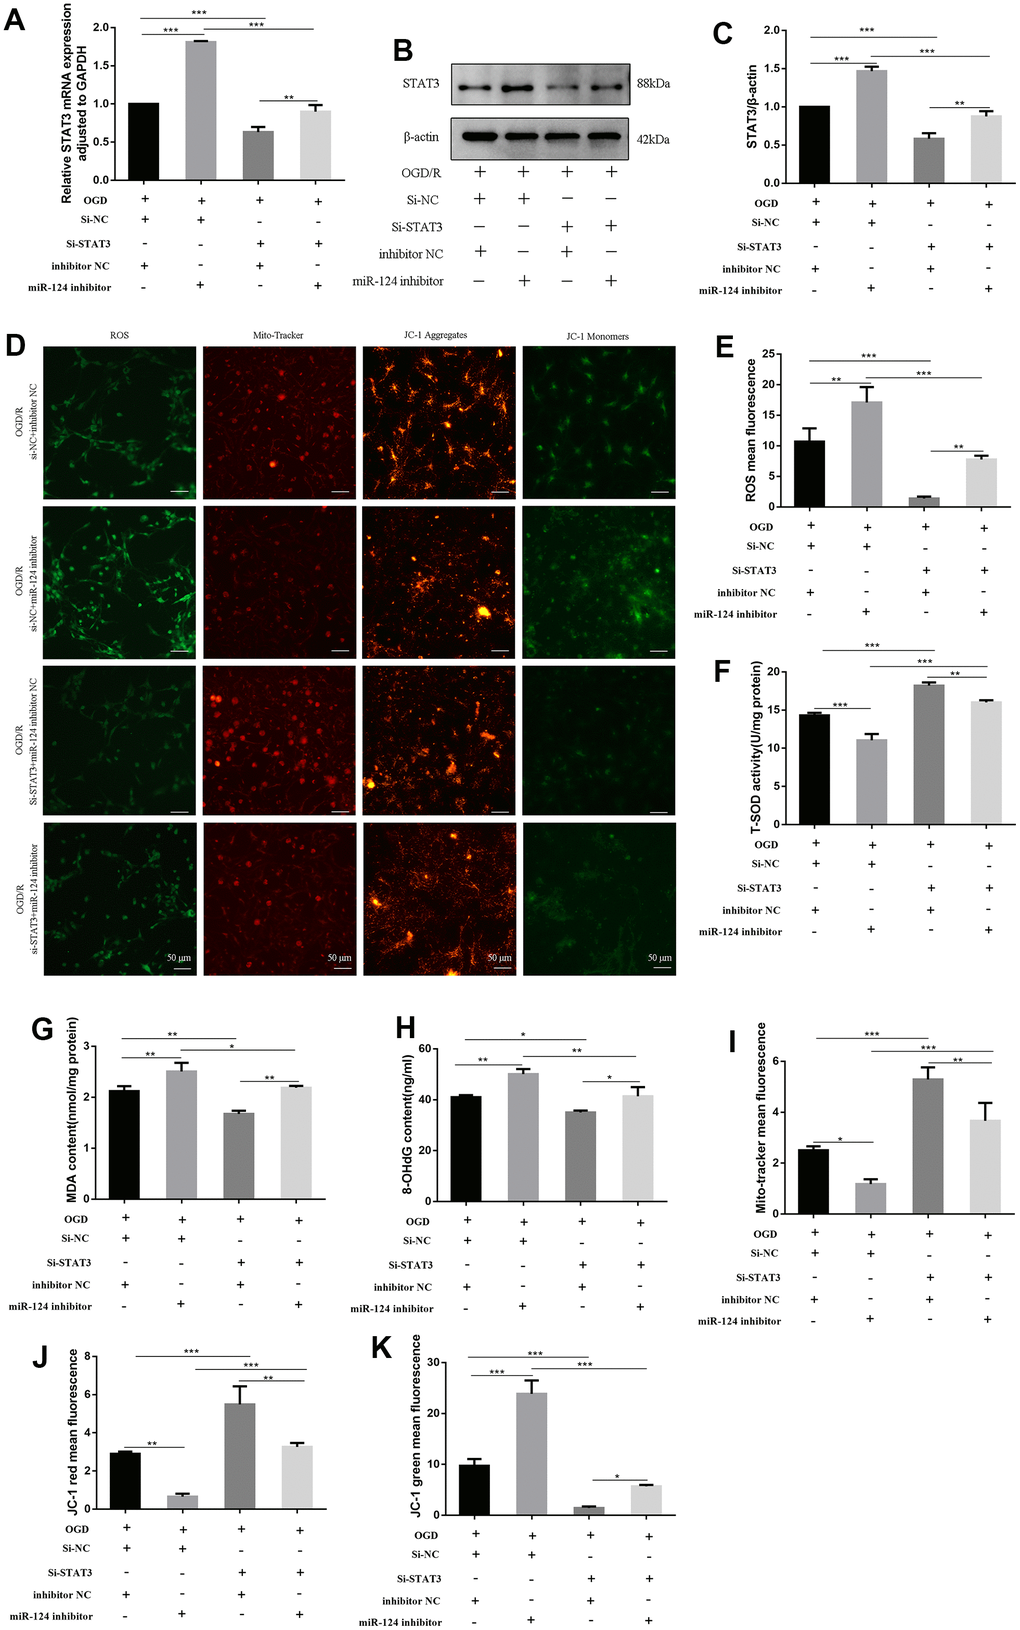 Knockdown of STAT3 reversed the effects of miR-124 inhibitor on oxidative stress in OGD-treated neurons. The neurons were transfected with si-NC, si-STAT3, or co-transfected with si-NC and inhibitor NC, or co-transfected with si-NC and miR-124 inhibitor, or co-transfected with si-STAT3 and inhibitor NC, or co-transfected with si-STAT3 and miR-124 inhibitor. (A) The STAT3 mRNA was detected by qRT-PCR; (B) The protein levels of STAT3 were detected by Western blot; (C) Quantitative analysis of the protein levels of STAT3; (D) Intracellular ROS was measured using DCFH-DA with a fluorescence microscope; Representative photomicrograph of mito-tracker red; Representative photomicrographs of fluorescence shift from red to green of JC-1 staining. Scale bar, 50μm; (E) Quantitative analysis green fluorescence of ROS; (F) The SOD activity was determined by the commercial kits; (G) The content of MDA was determined by the commercial kits; (H) The content of 8-OHdG was determined by the commercial kits; (I) Quantitative analysis of mitochondria tracker red; (J, K) Quantitative analysis of fluorescence shift from red to green of JC-1 staining; Data were expressed as mean ± SD (derived from three independent experiments for each sample). NS, not significant for p > 0.05, * p p p 